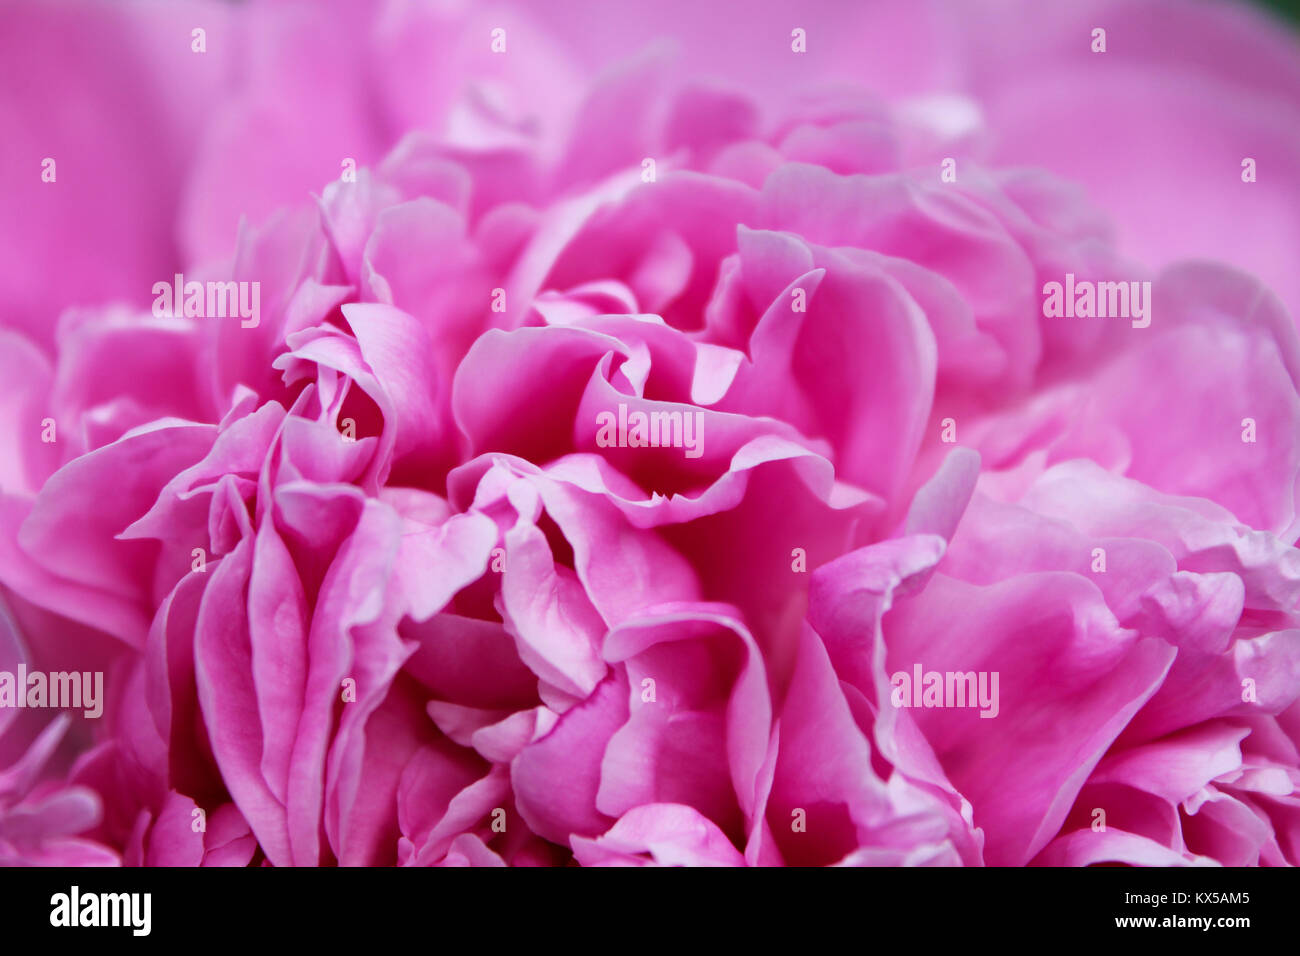 pink background from the core peony flower close-up Stock Photo